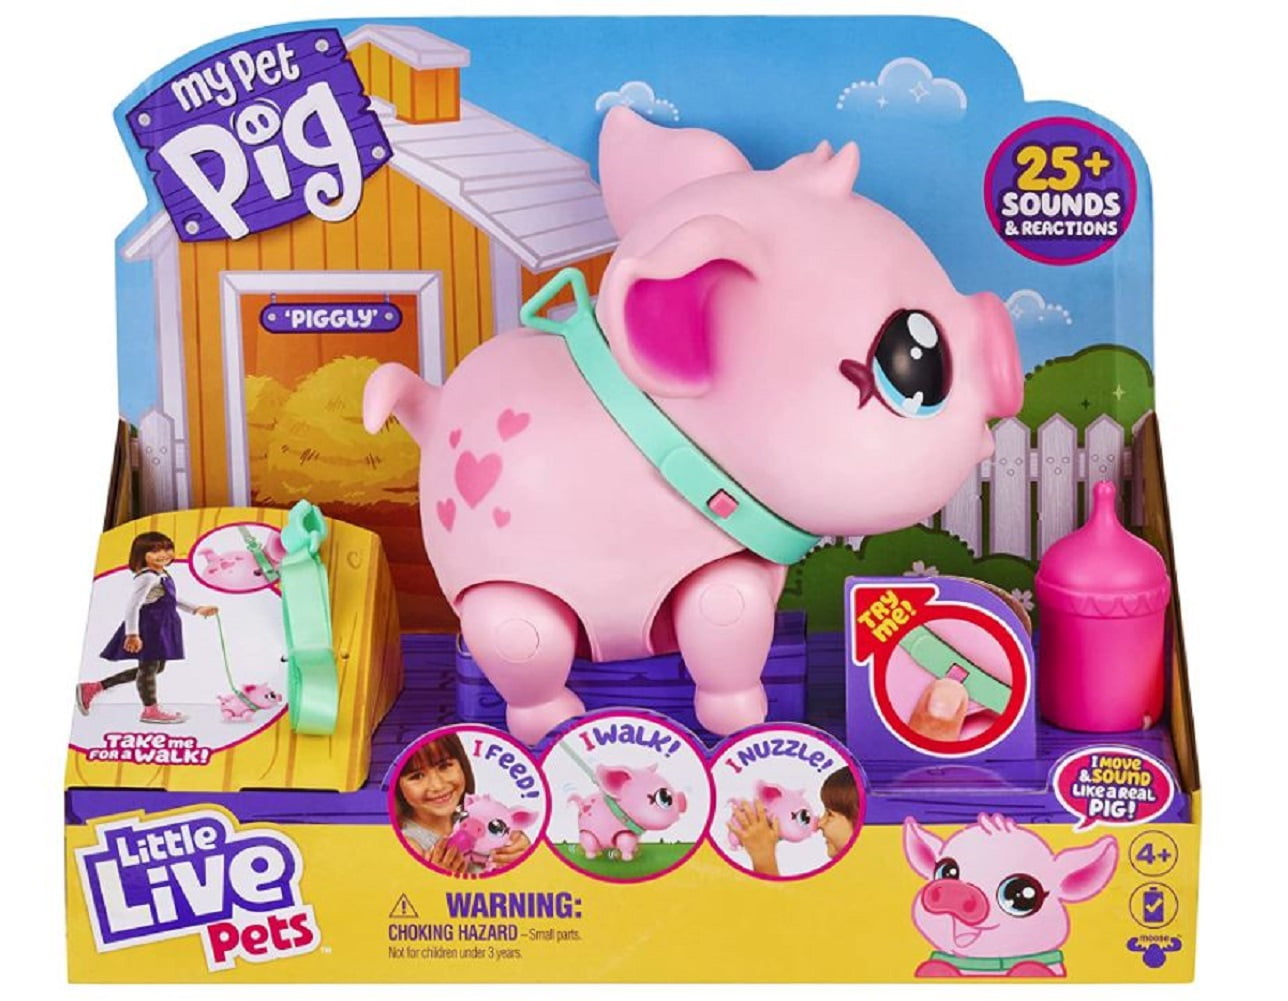 Little Live Pets My Pet Pig Piggly Electronic Children's Toy Interactive Sounds 